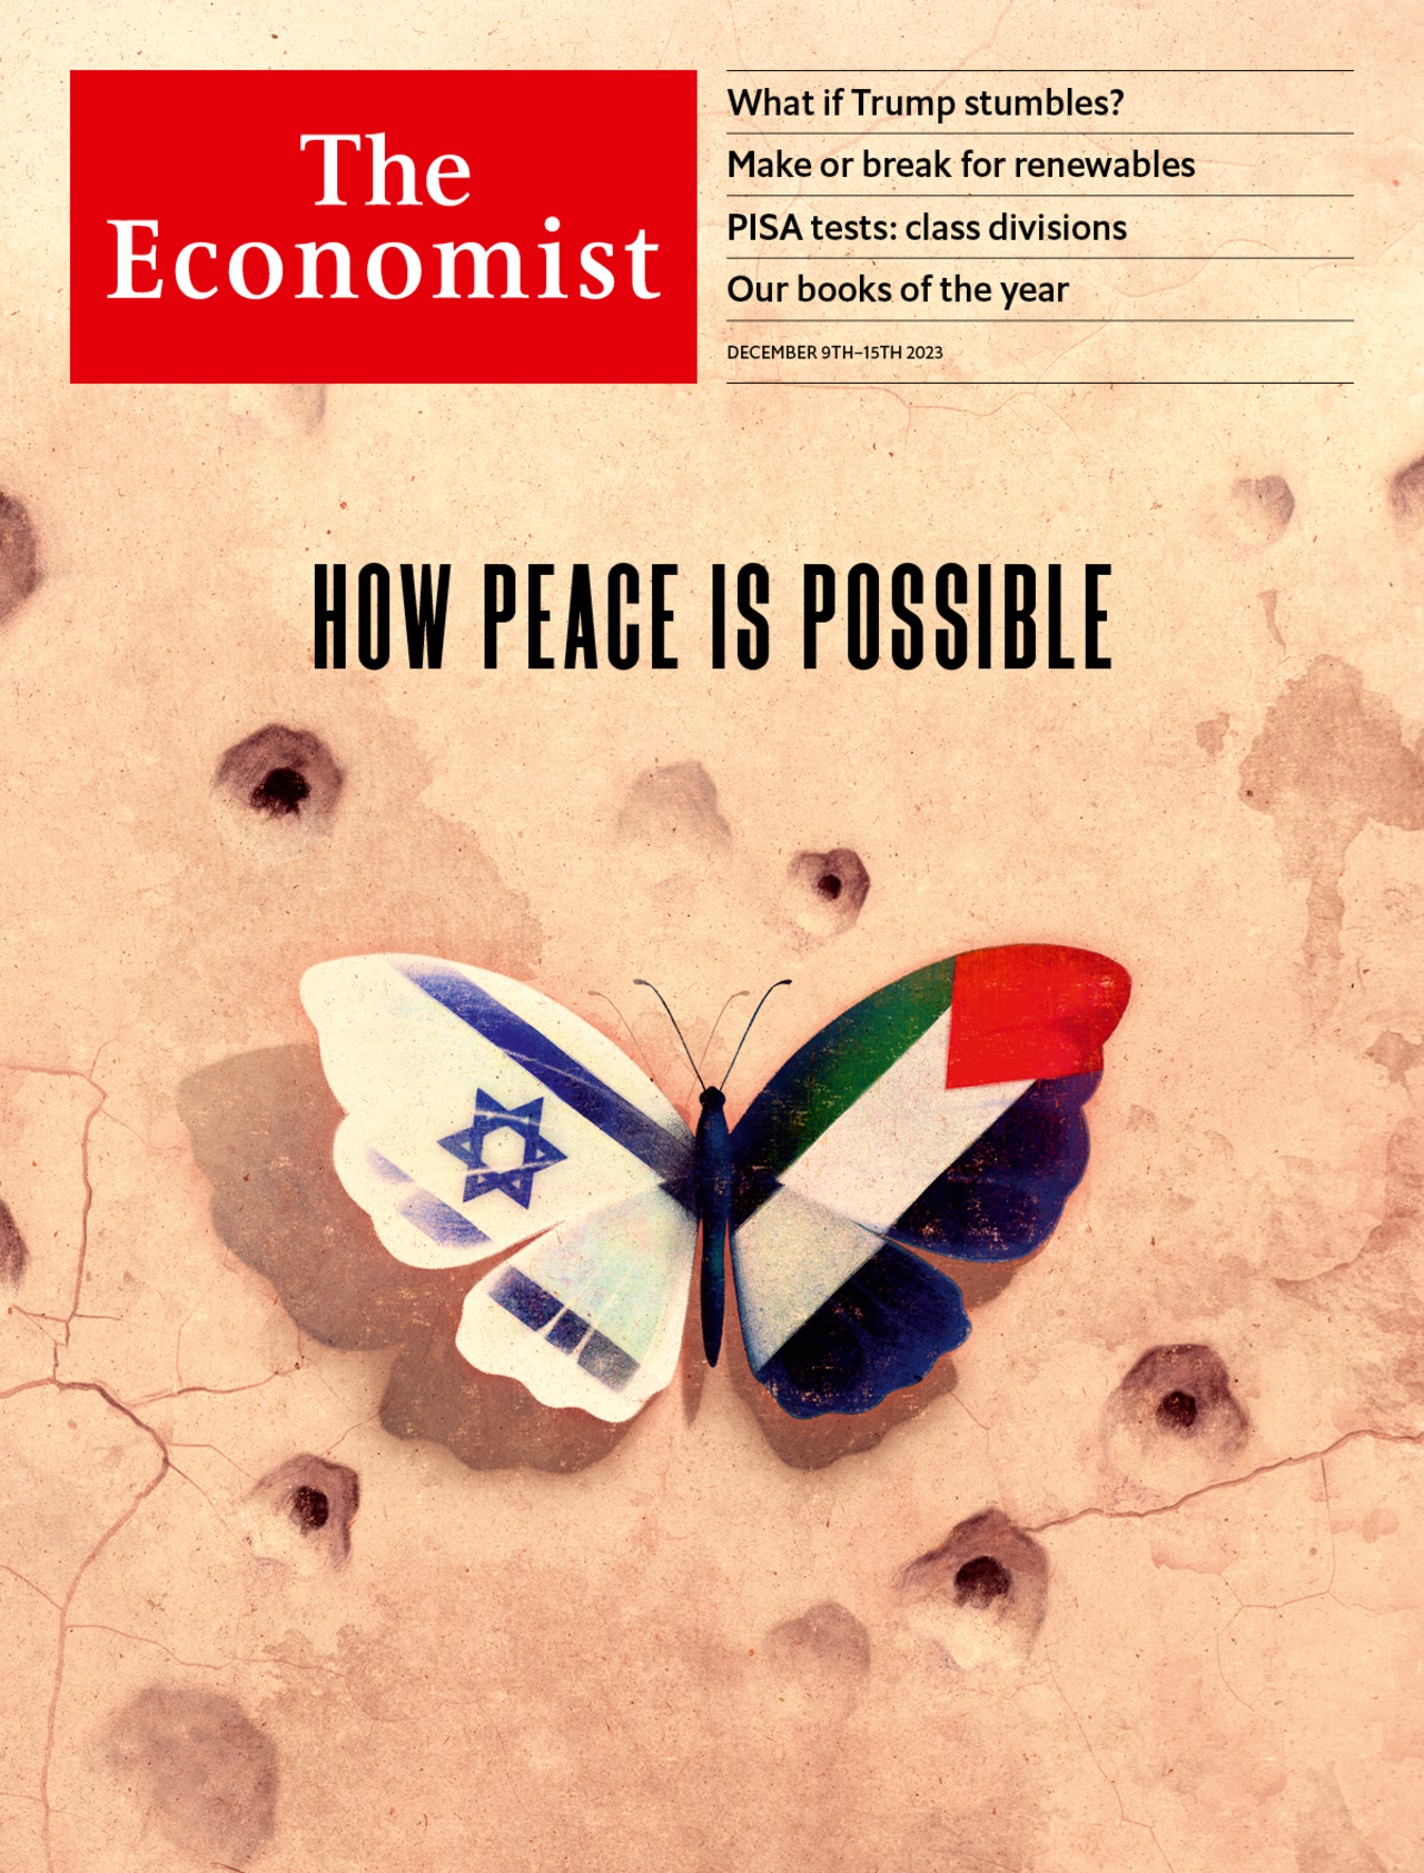 How peace is possible